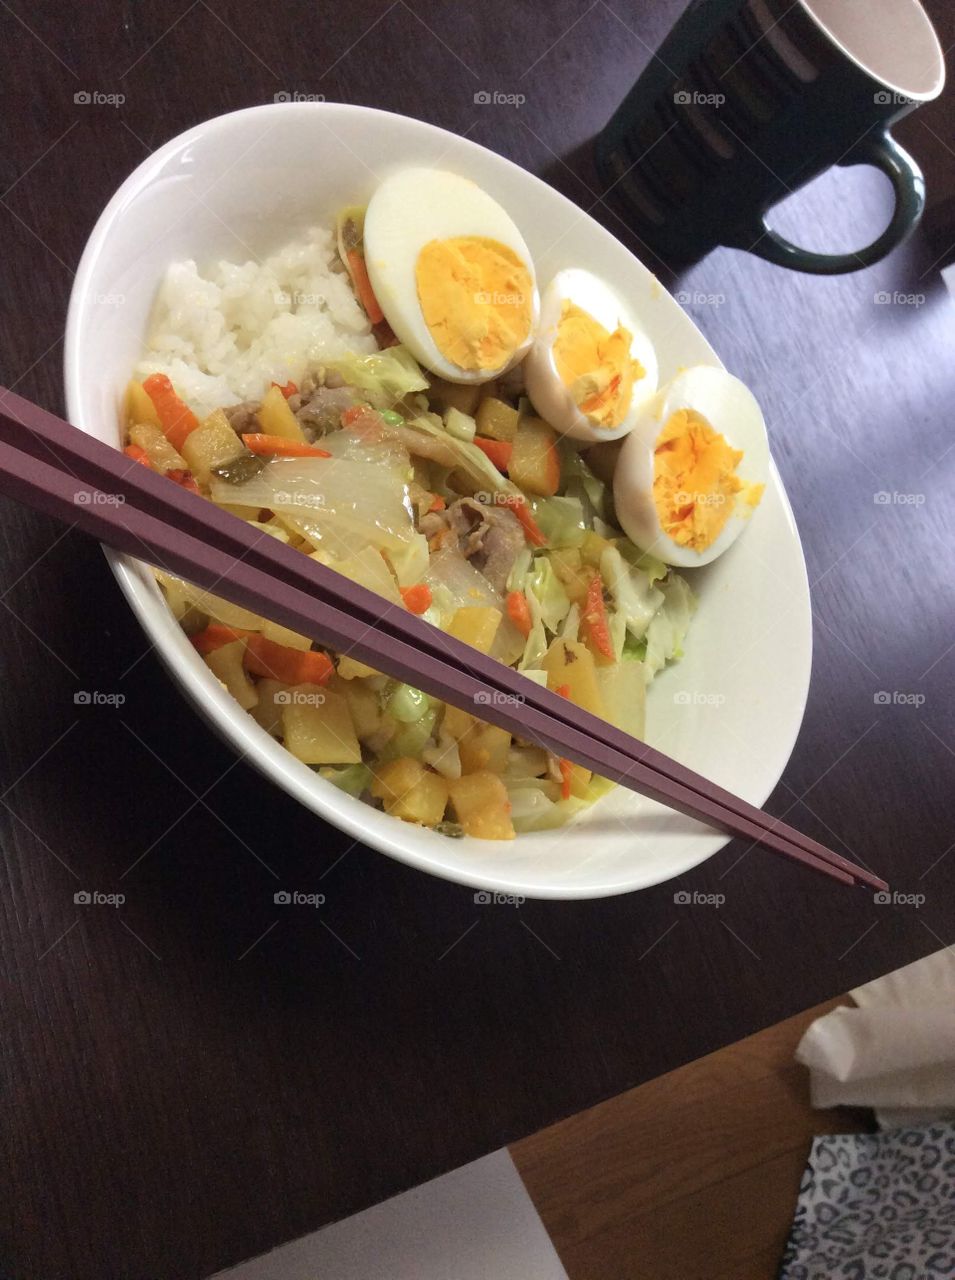 Quick stir fry with boiled eggs on a stormy afternoon. 